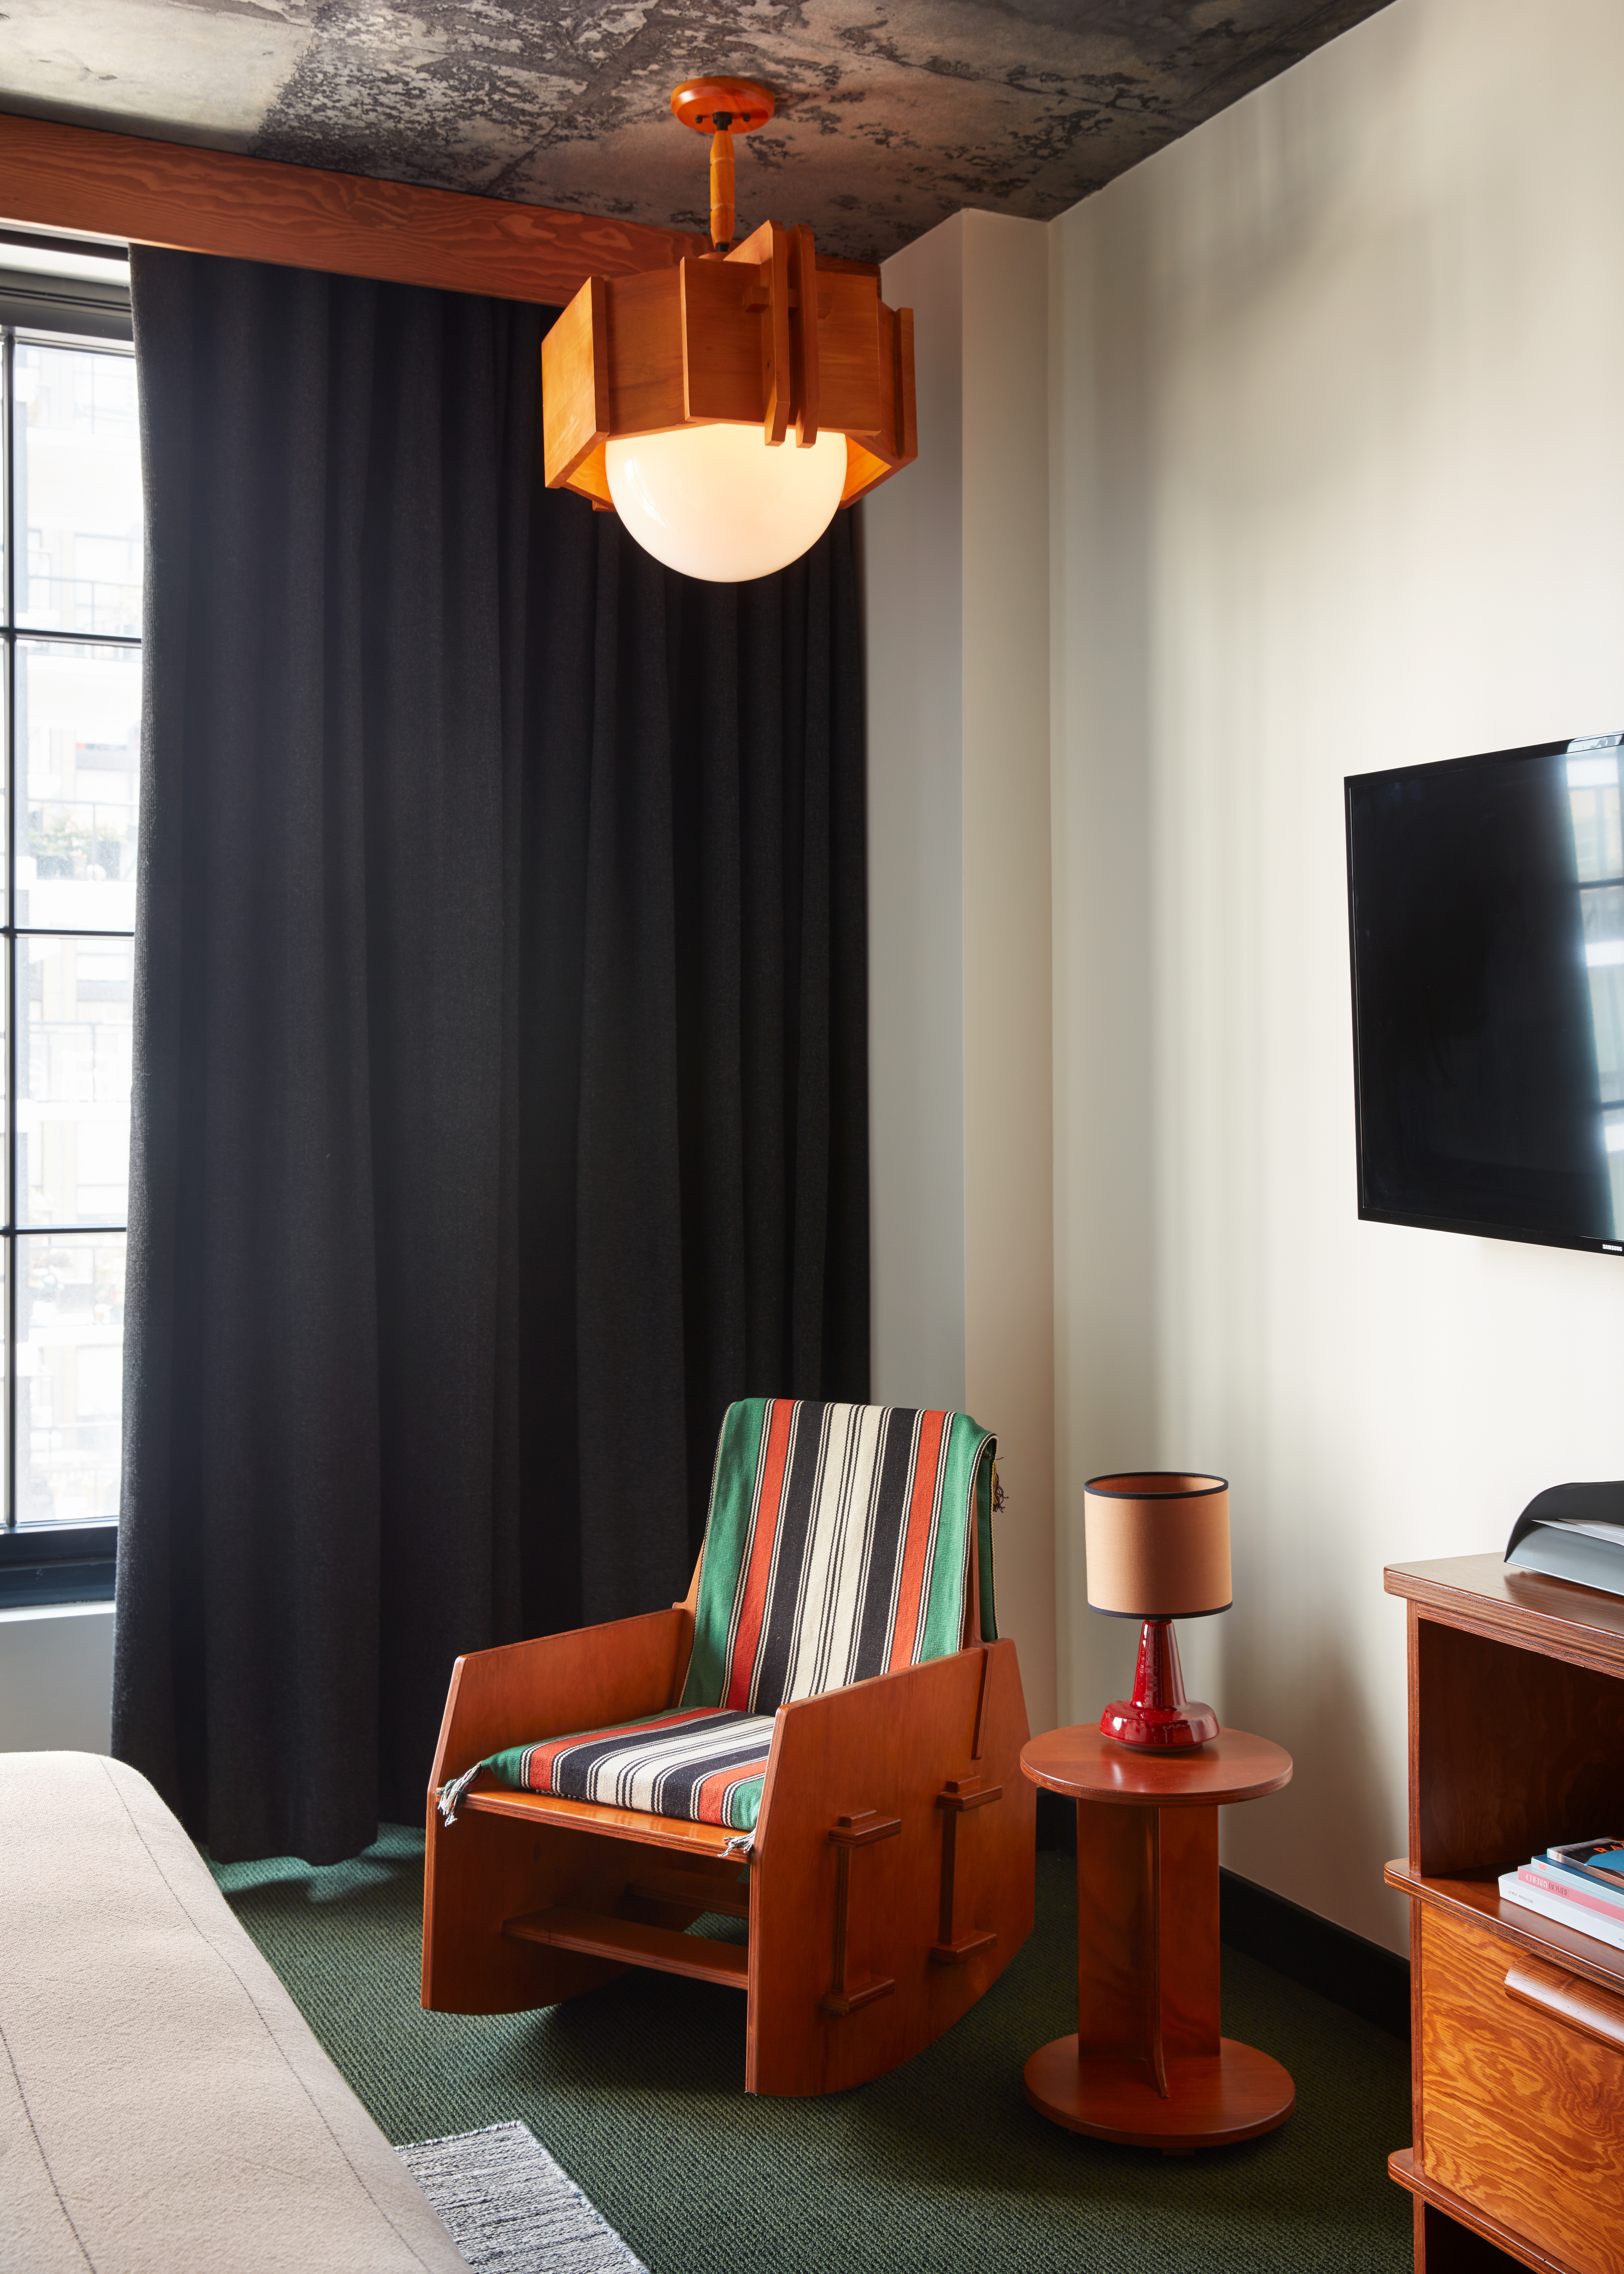 ace hotel brooklyn review